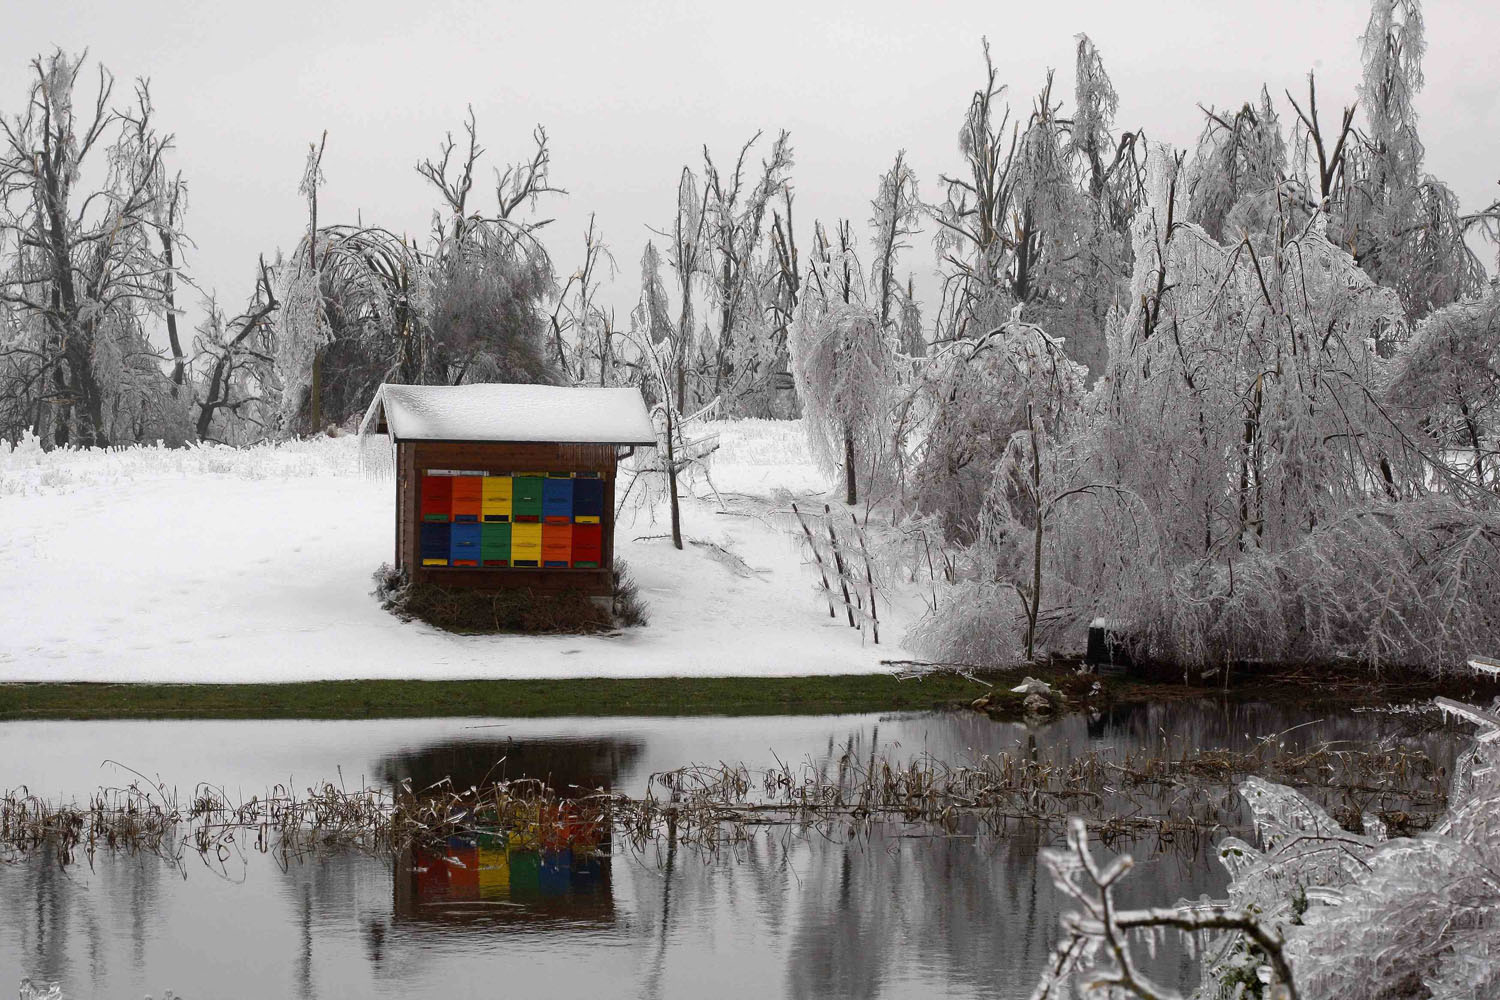 Feb. 4, 2014. Bee hives are seen surrounded by ice-covered broken trees in Rakitnik, Slovenia.